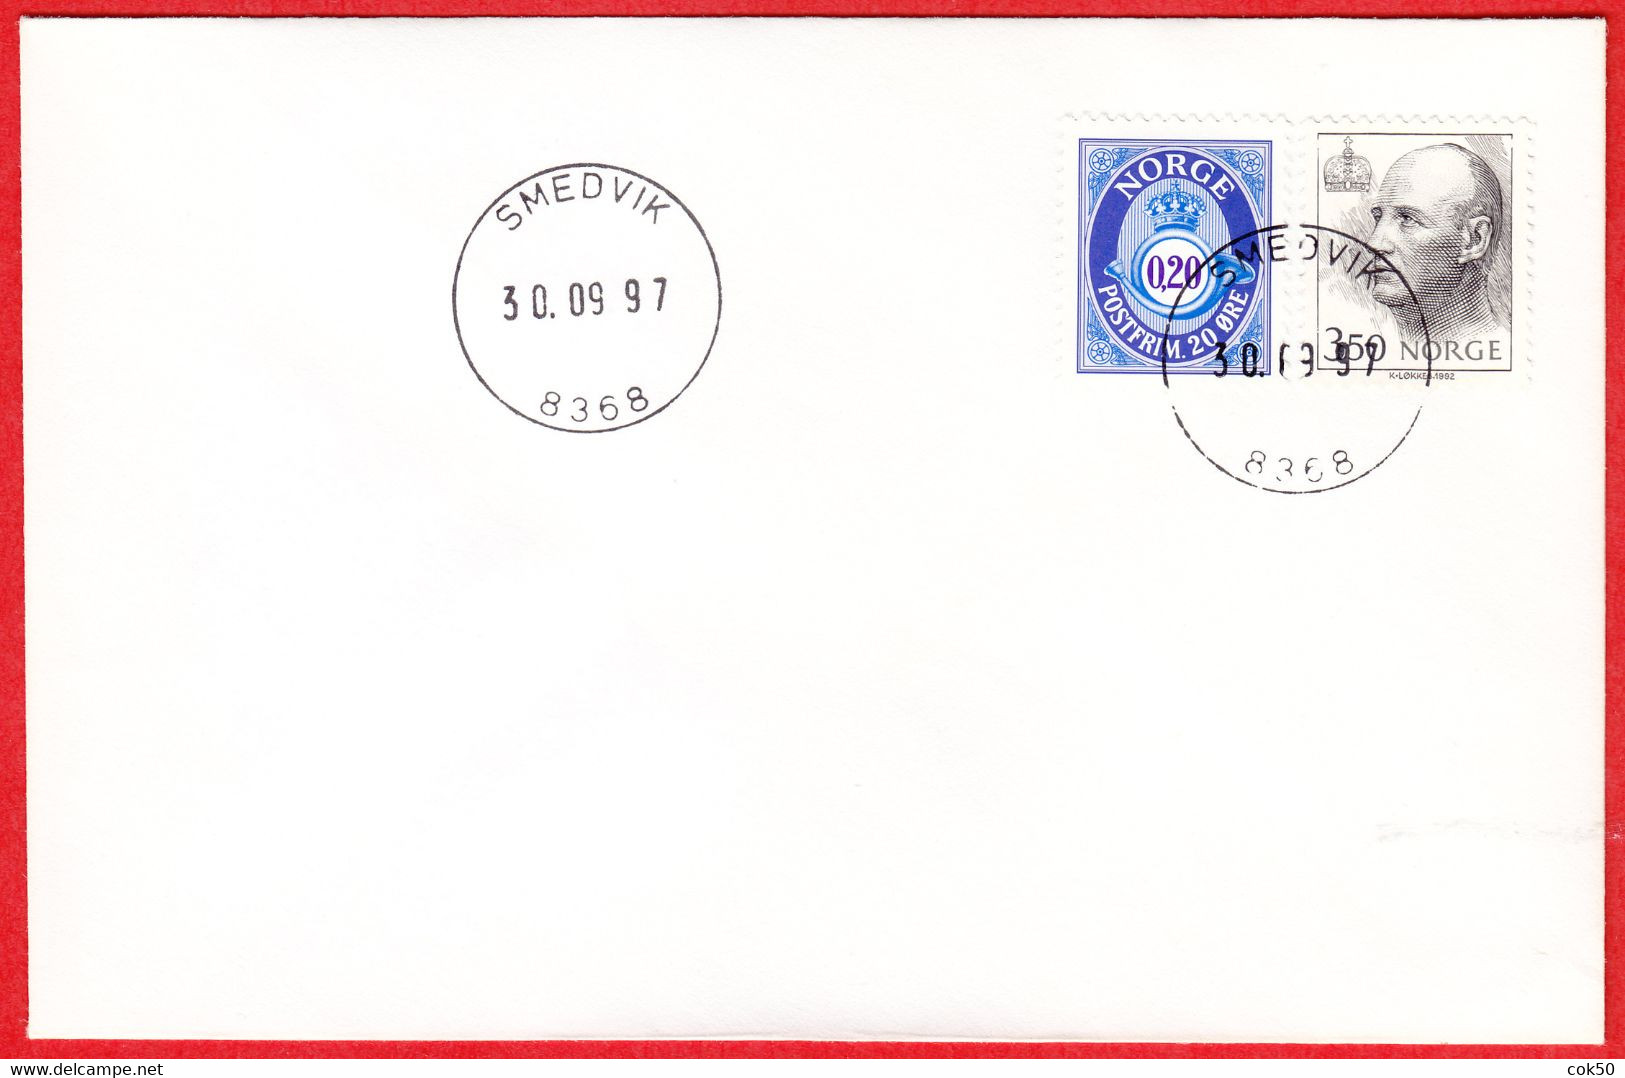 NORWAY -  8368 SMEDVIK - 24 MmØ - (Nordland County) - Last Day/postoffice Closed On 1997.09.30 - Lokale Uitgaven